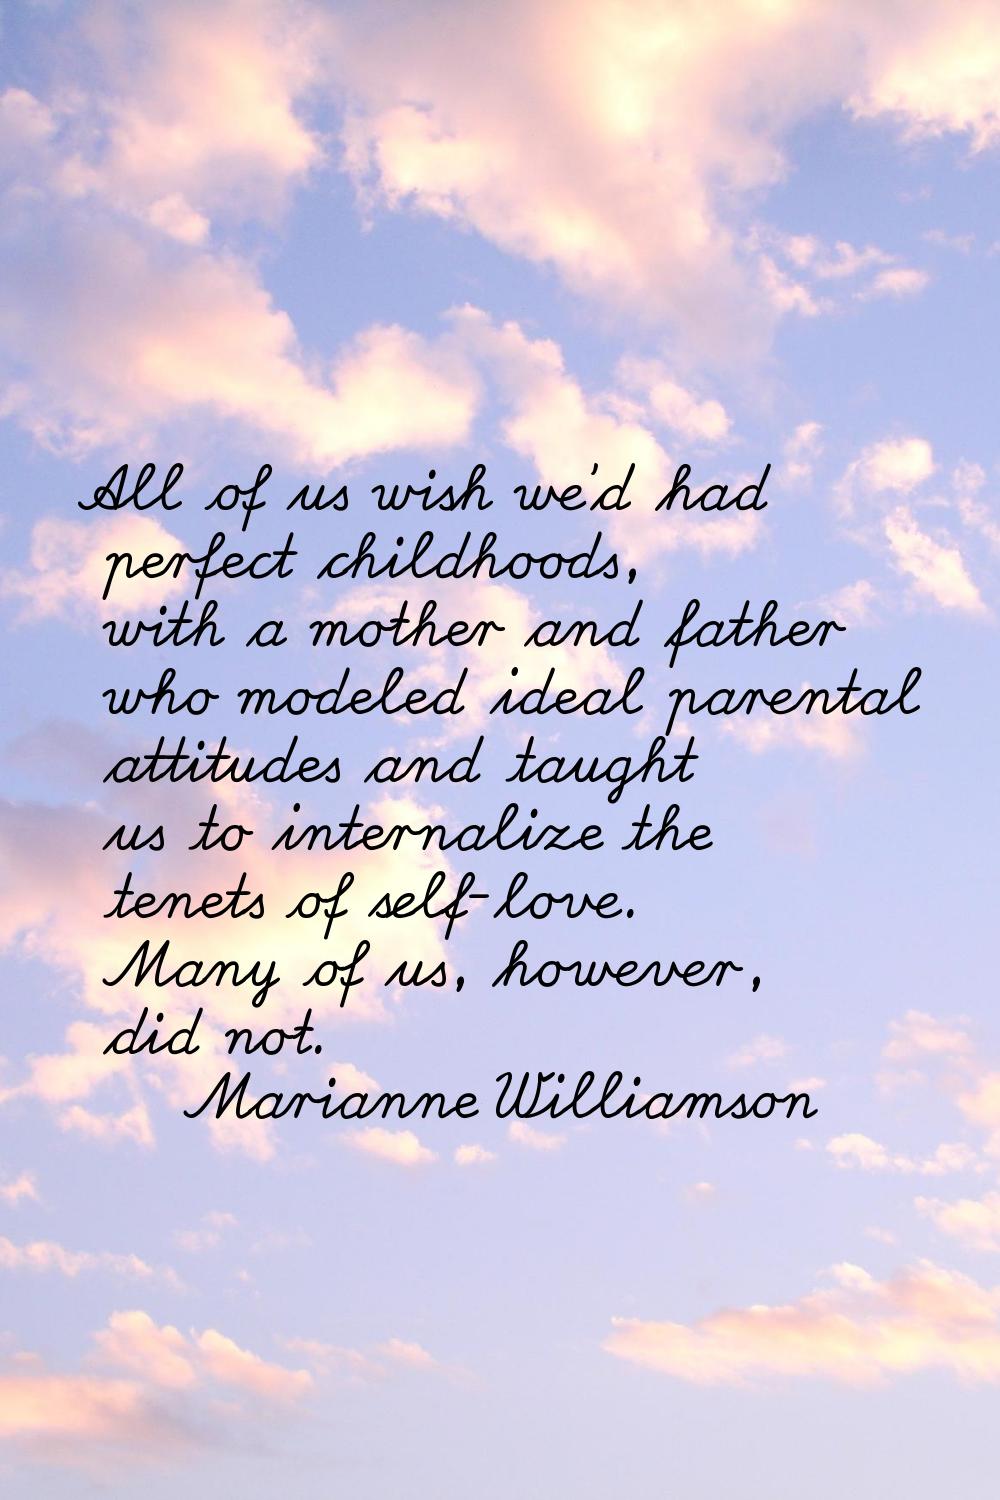 All of us wish we'd had perfect childhoods, with a mother and father who modeled ideal parental att